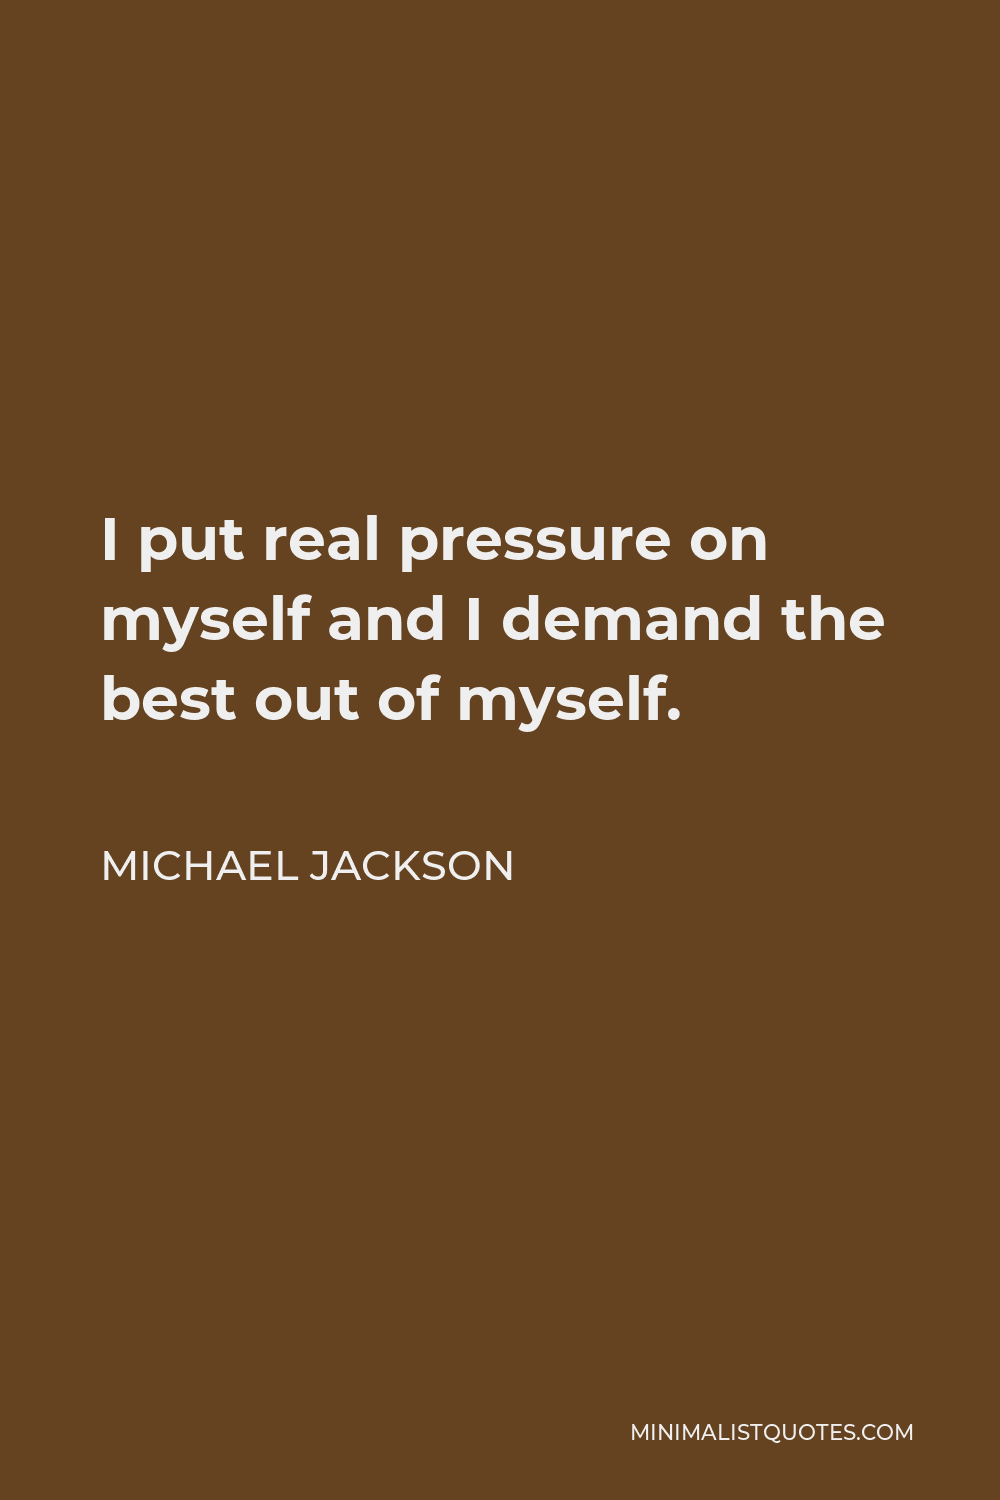 Michael Jackson Quote - I put real pressure on myself and I demand the best out of myself.